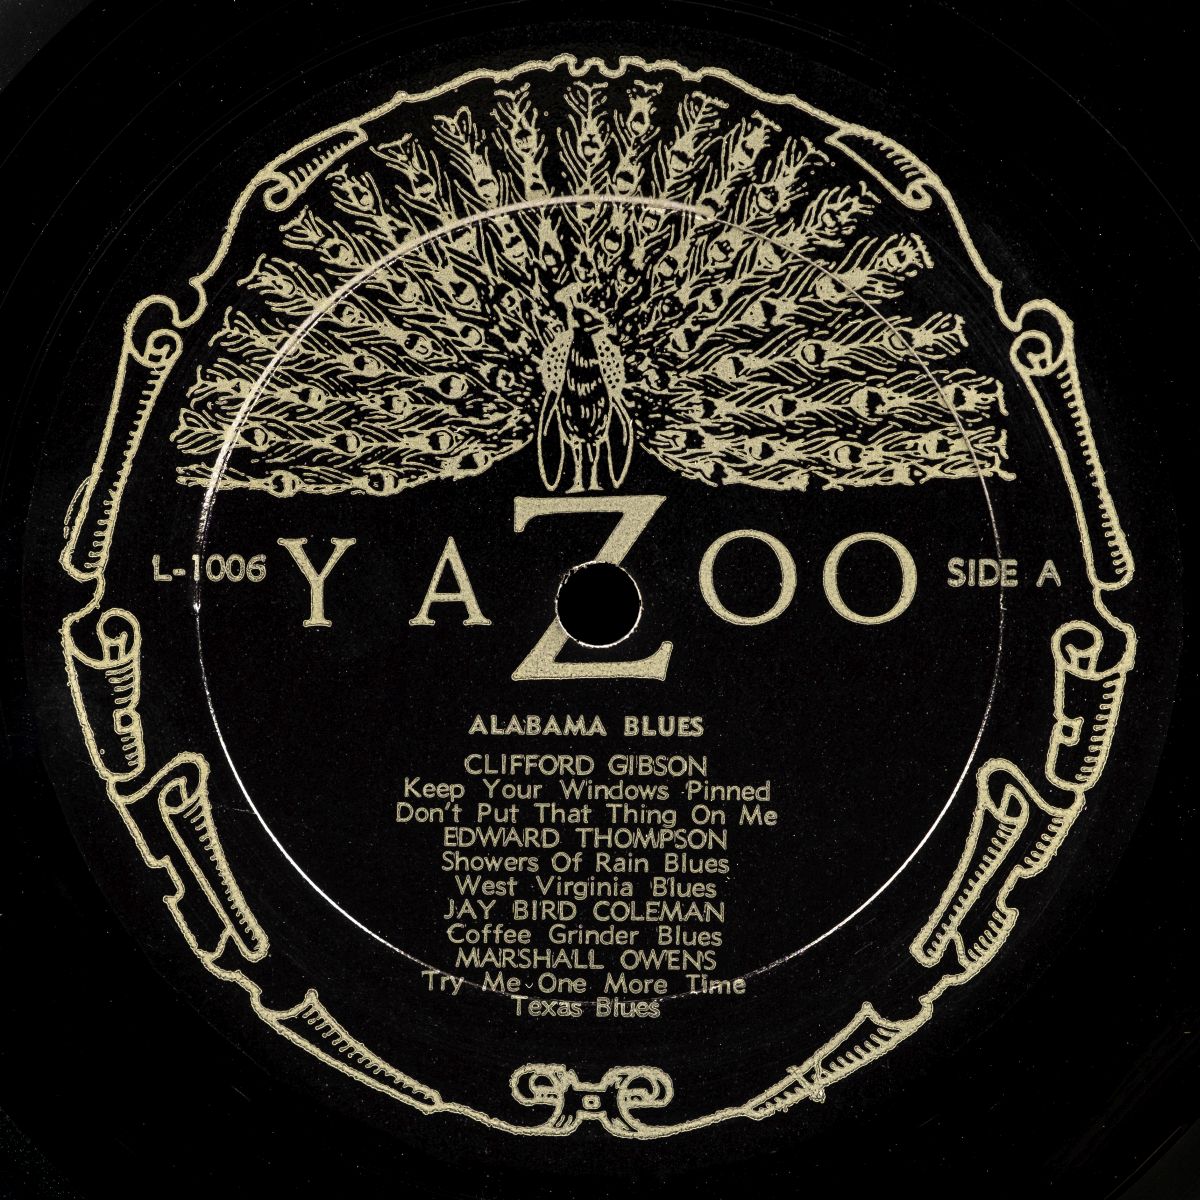 * Blues. Collection of blues LPs / vinyl records on the Yazoo record label plus Bessie Smith LPs